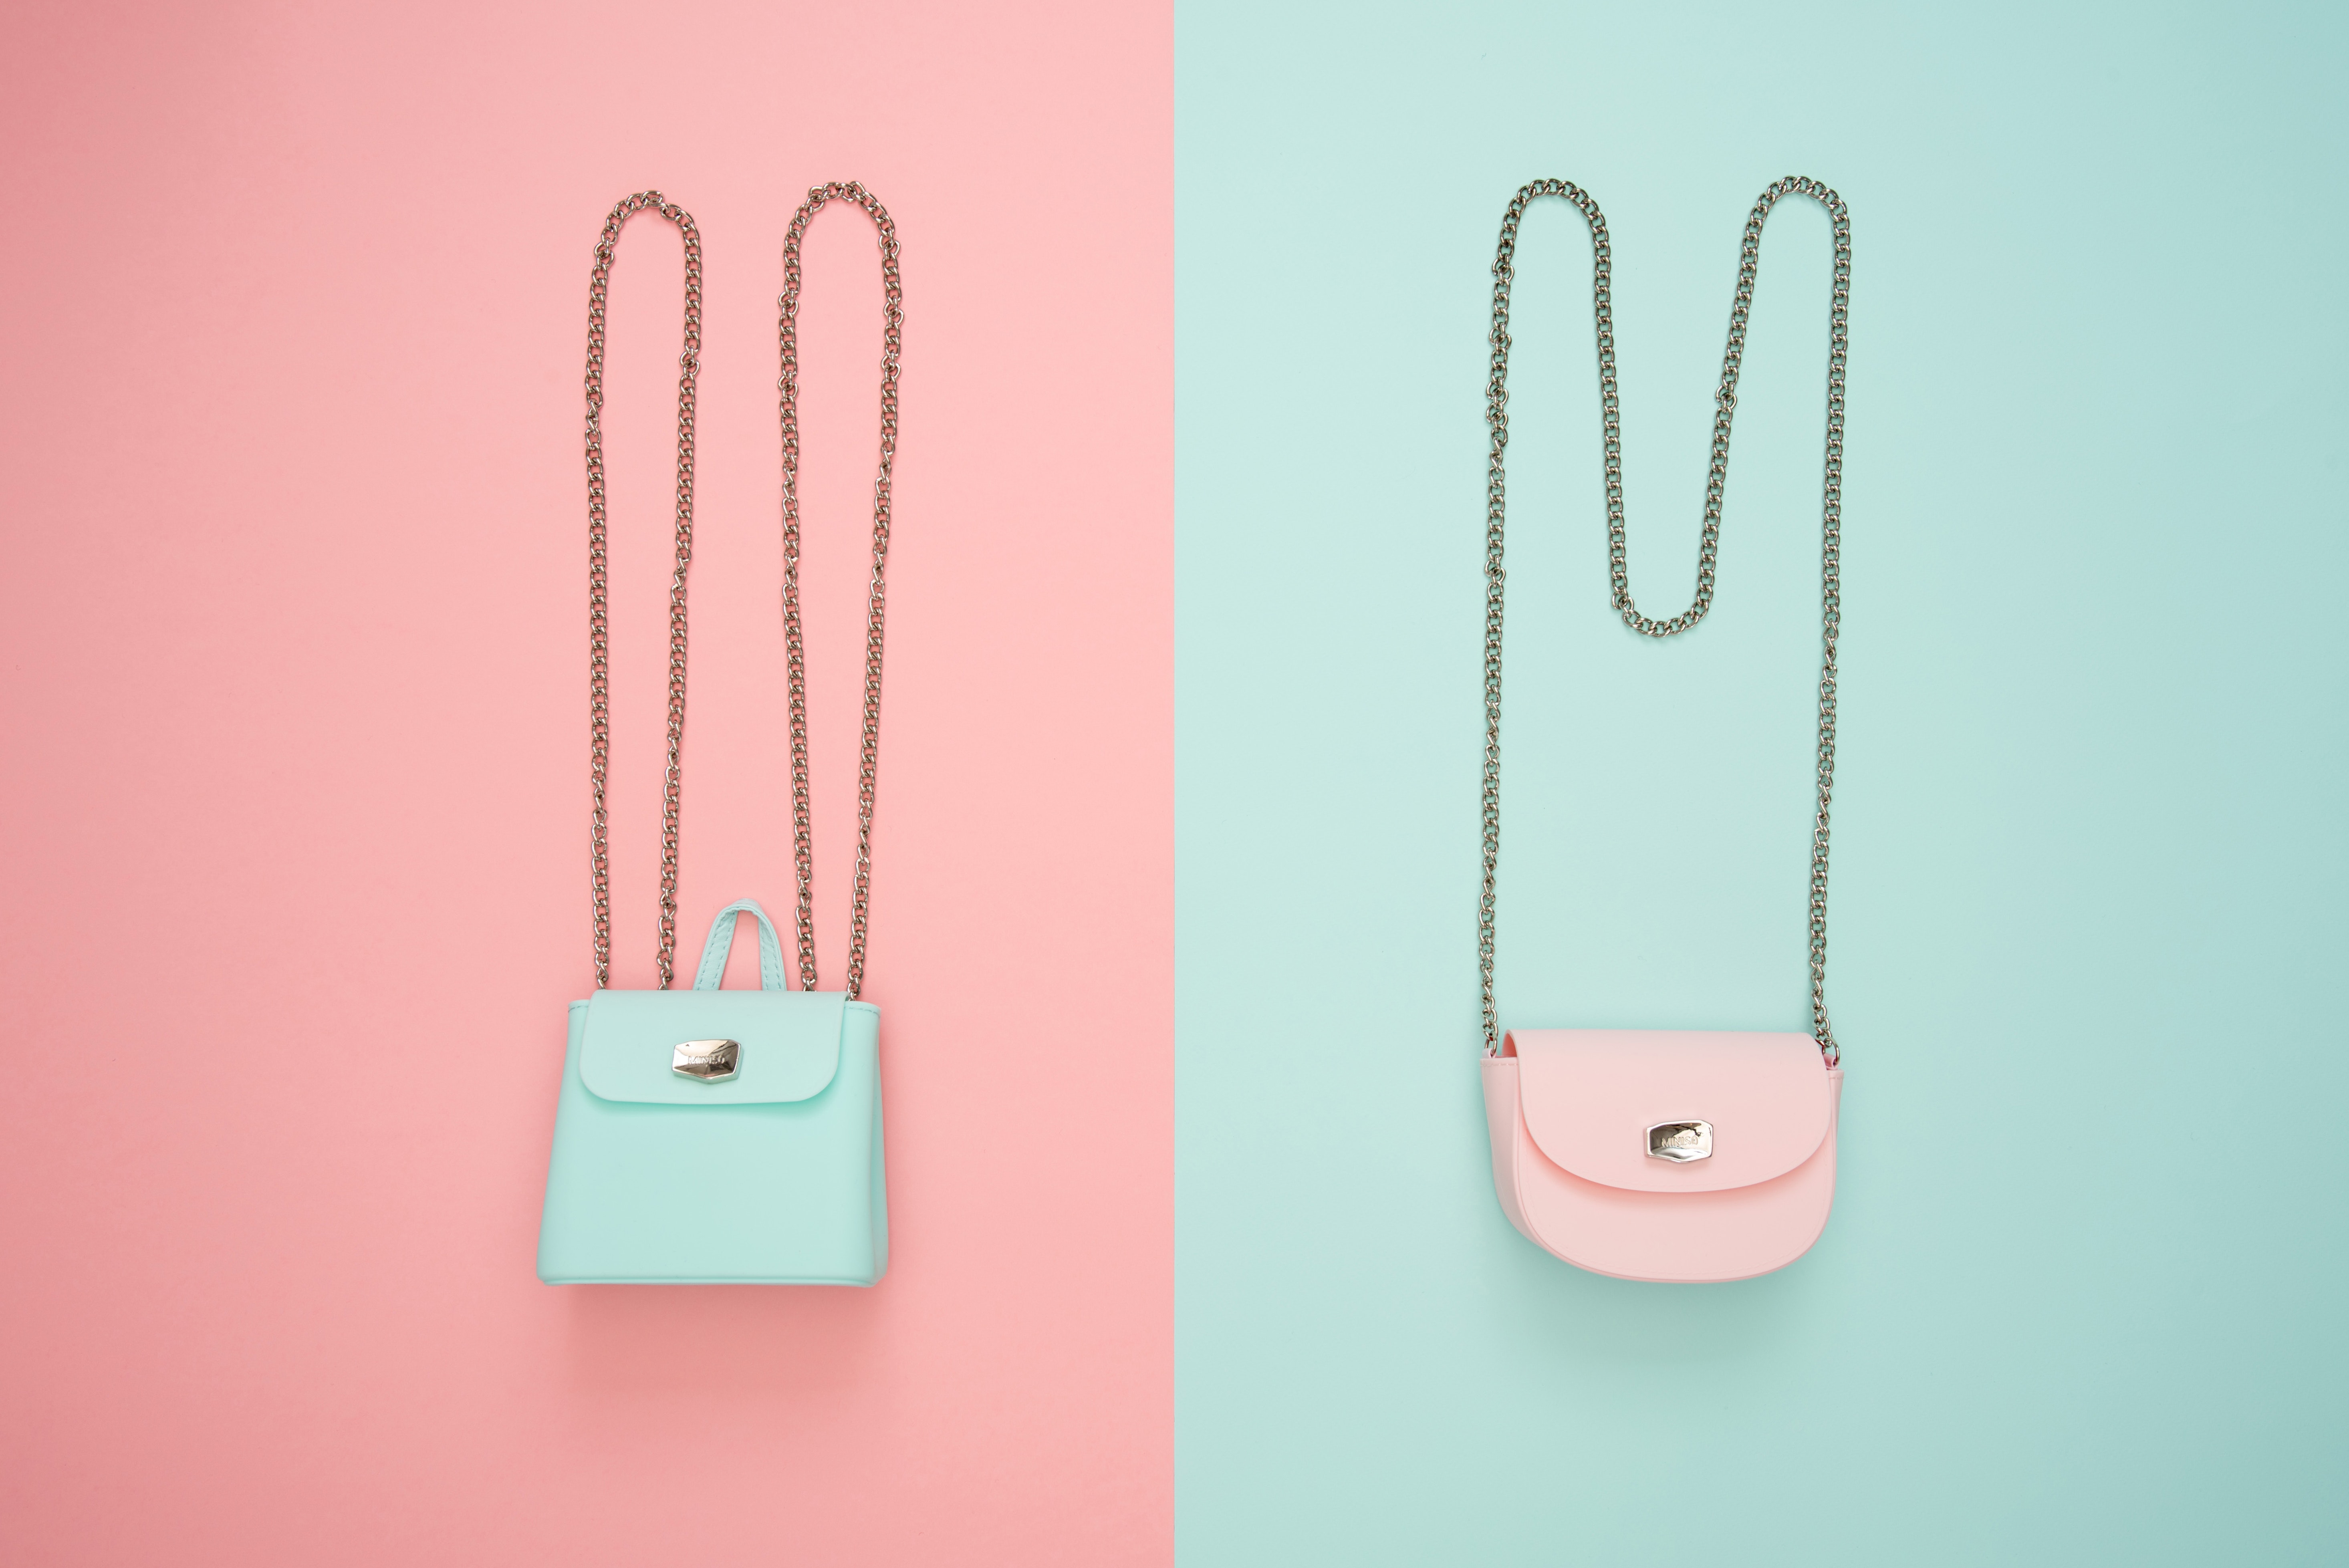 photo-of-two-teal-and-pink-leather-crossbody-bags-1038000.jpg